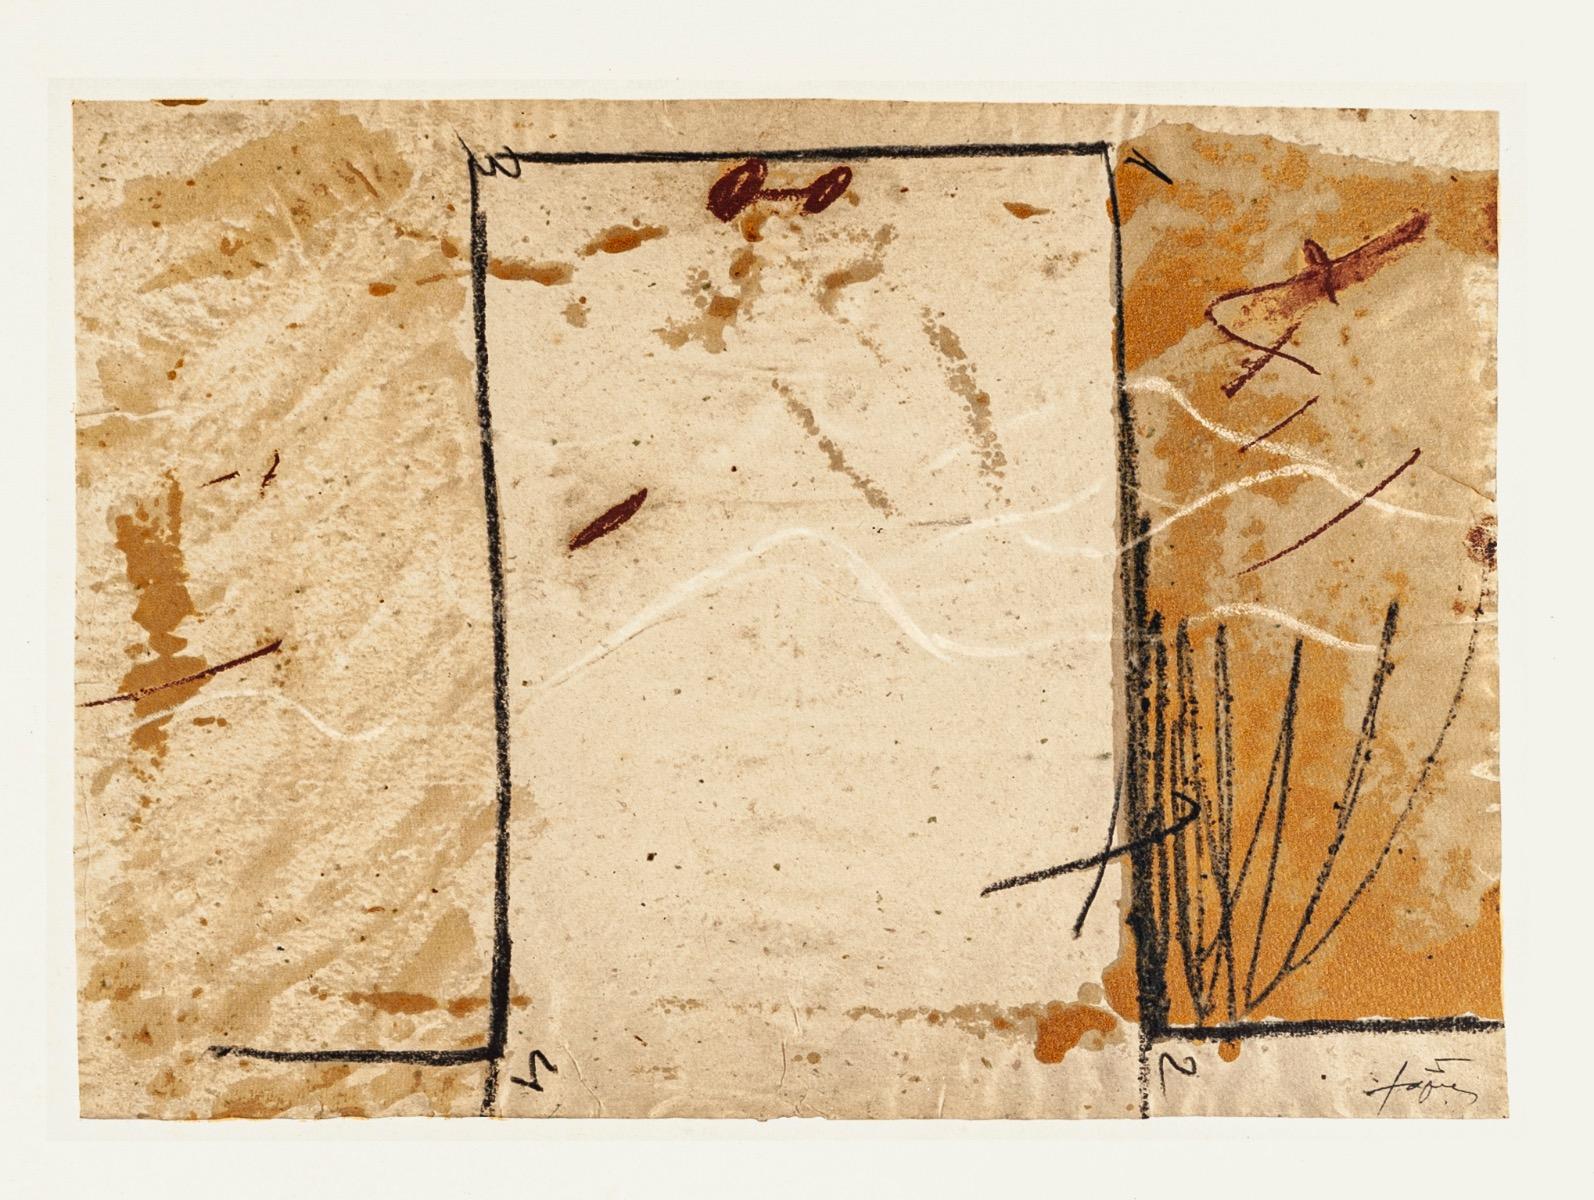 Antoni Tàpies (after) Abstract Print - Jambs  - Vintage Offset Print after Antoni Tàpies  - 1982